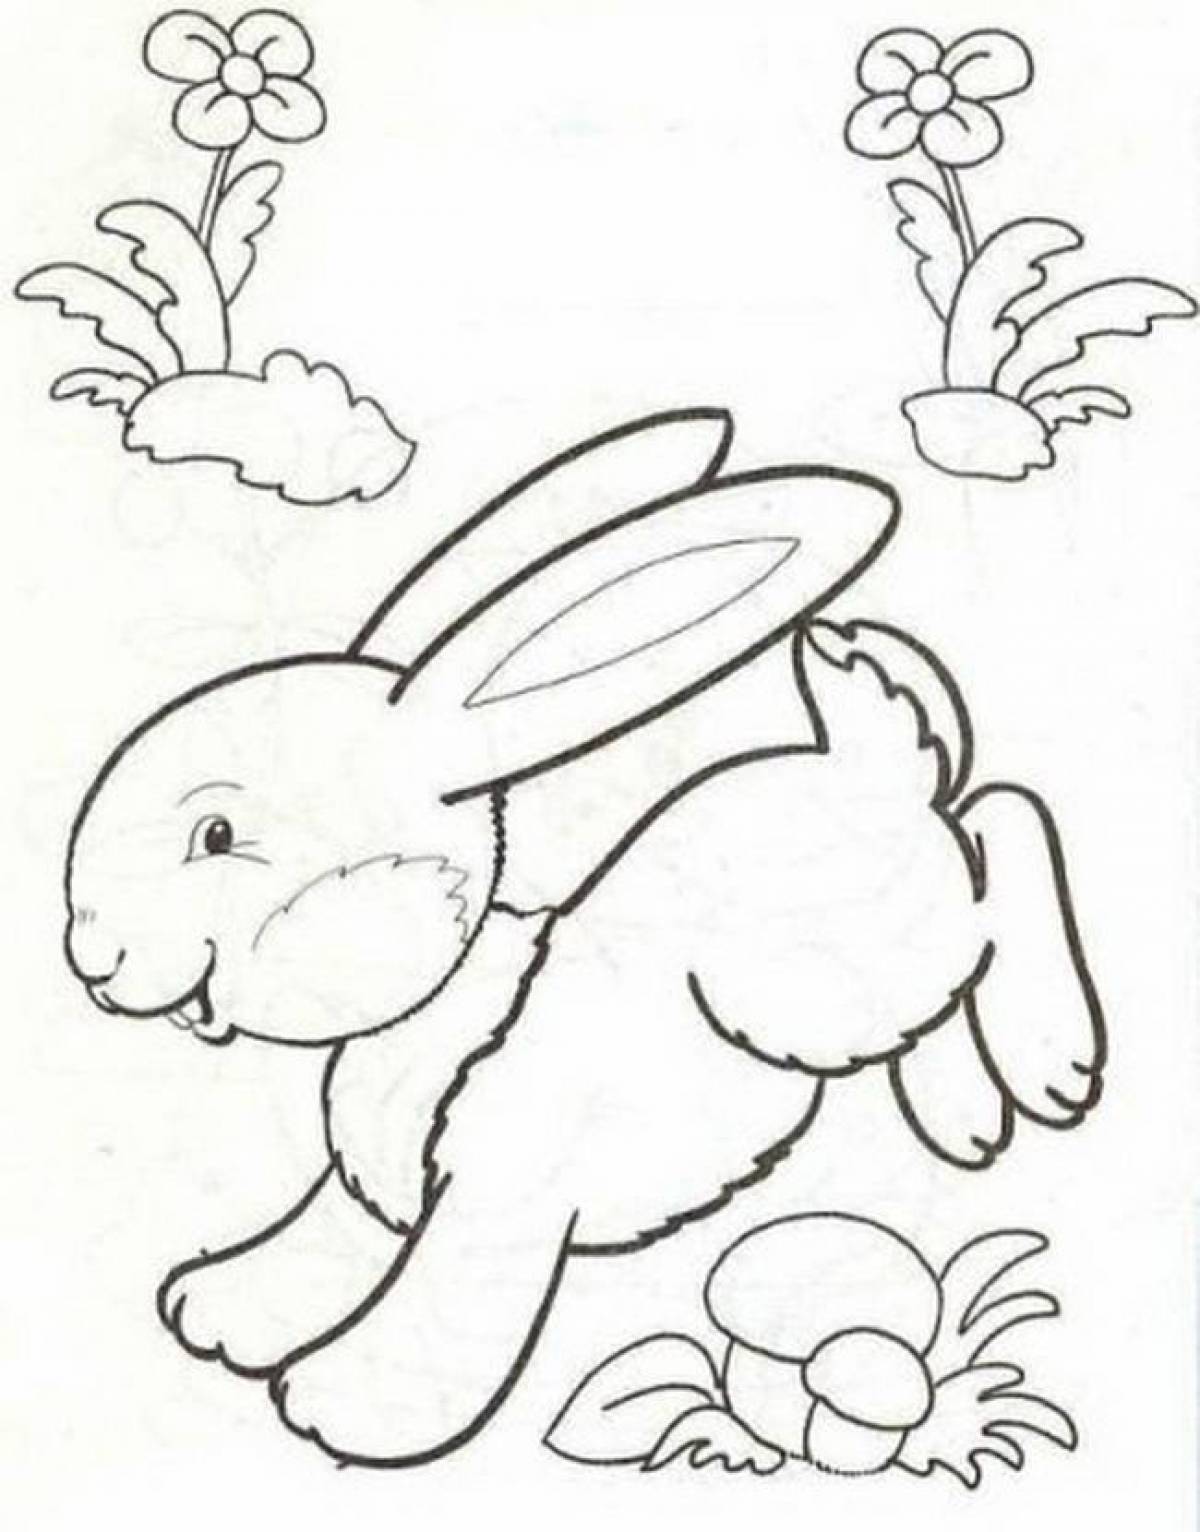 Coloring book dizzy hare for children 3-4 years old